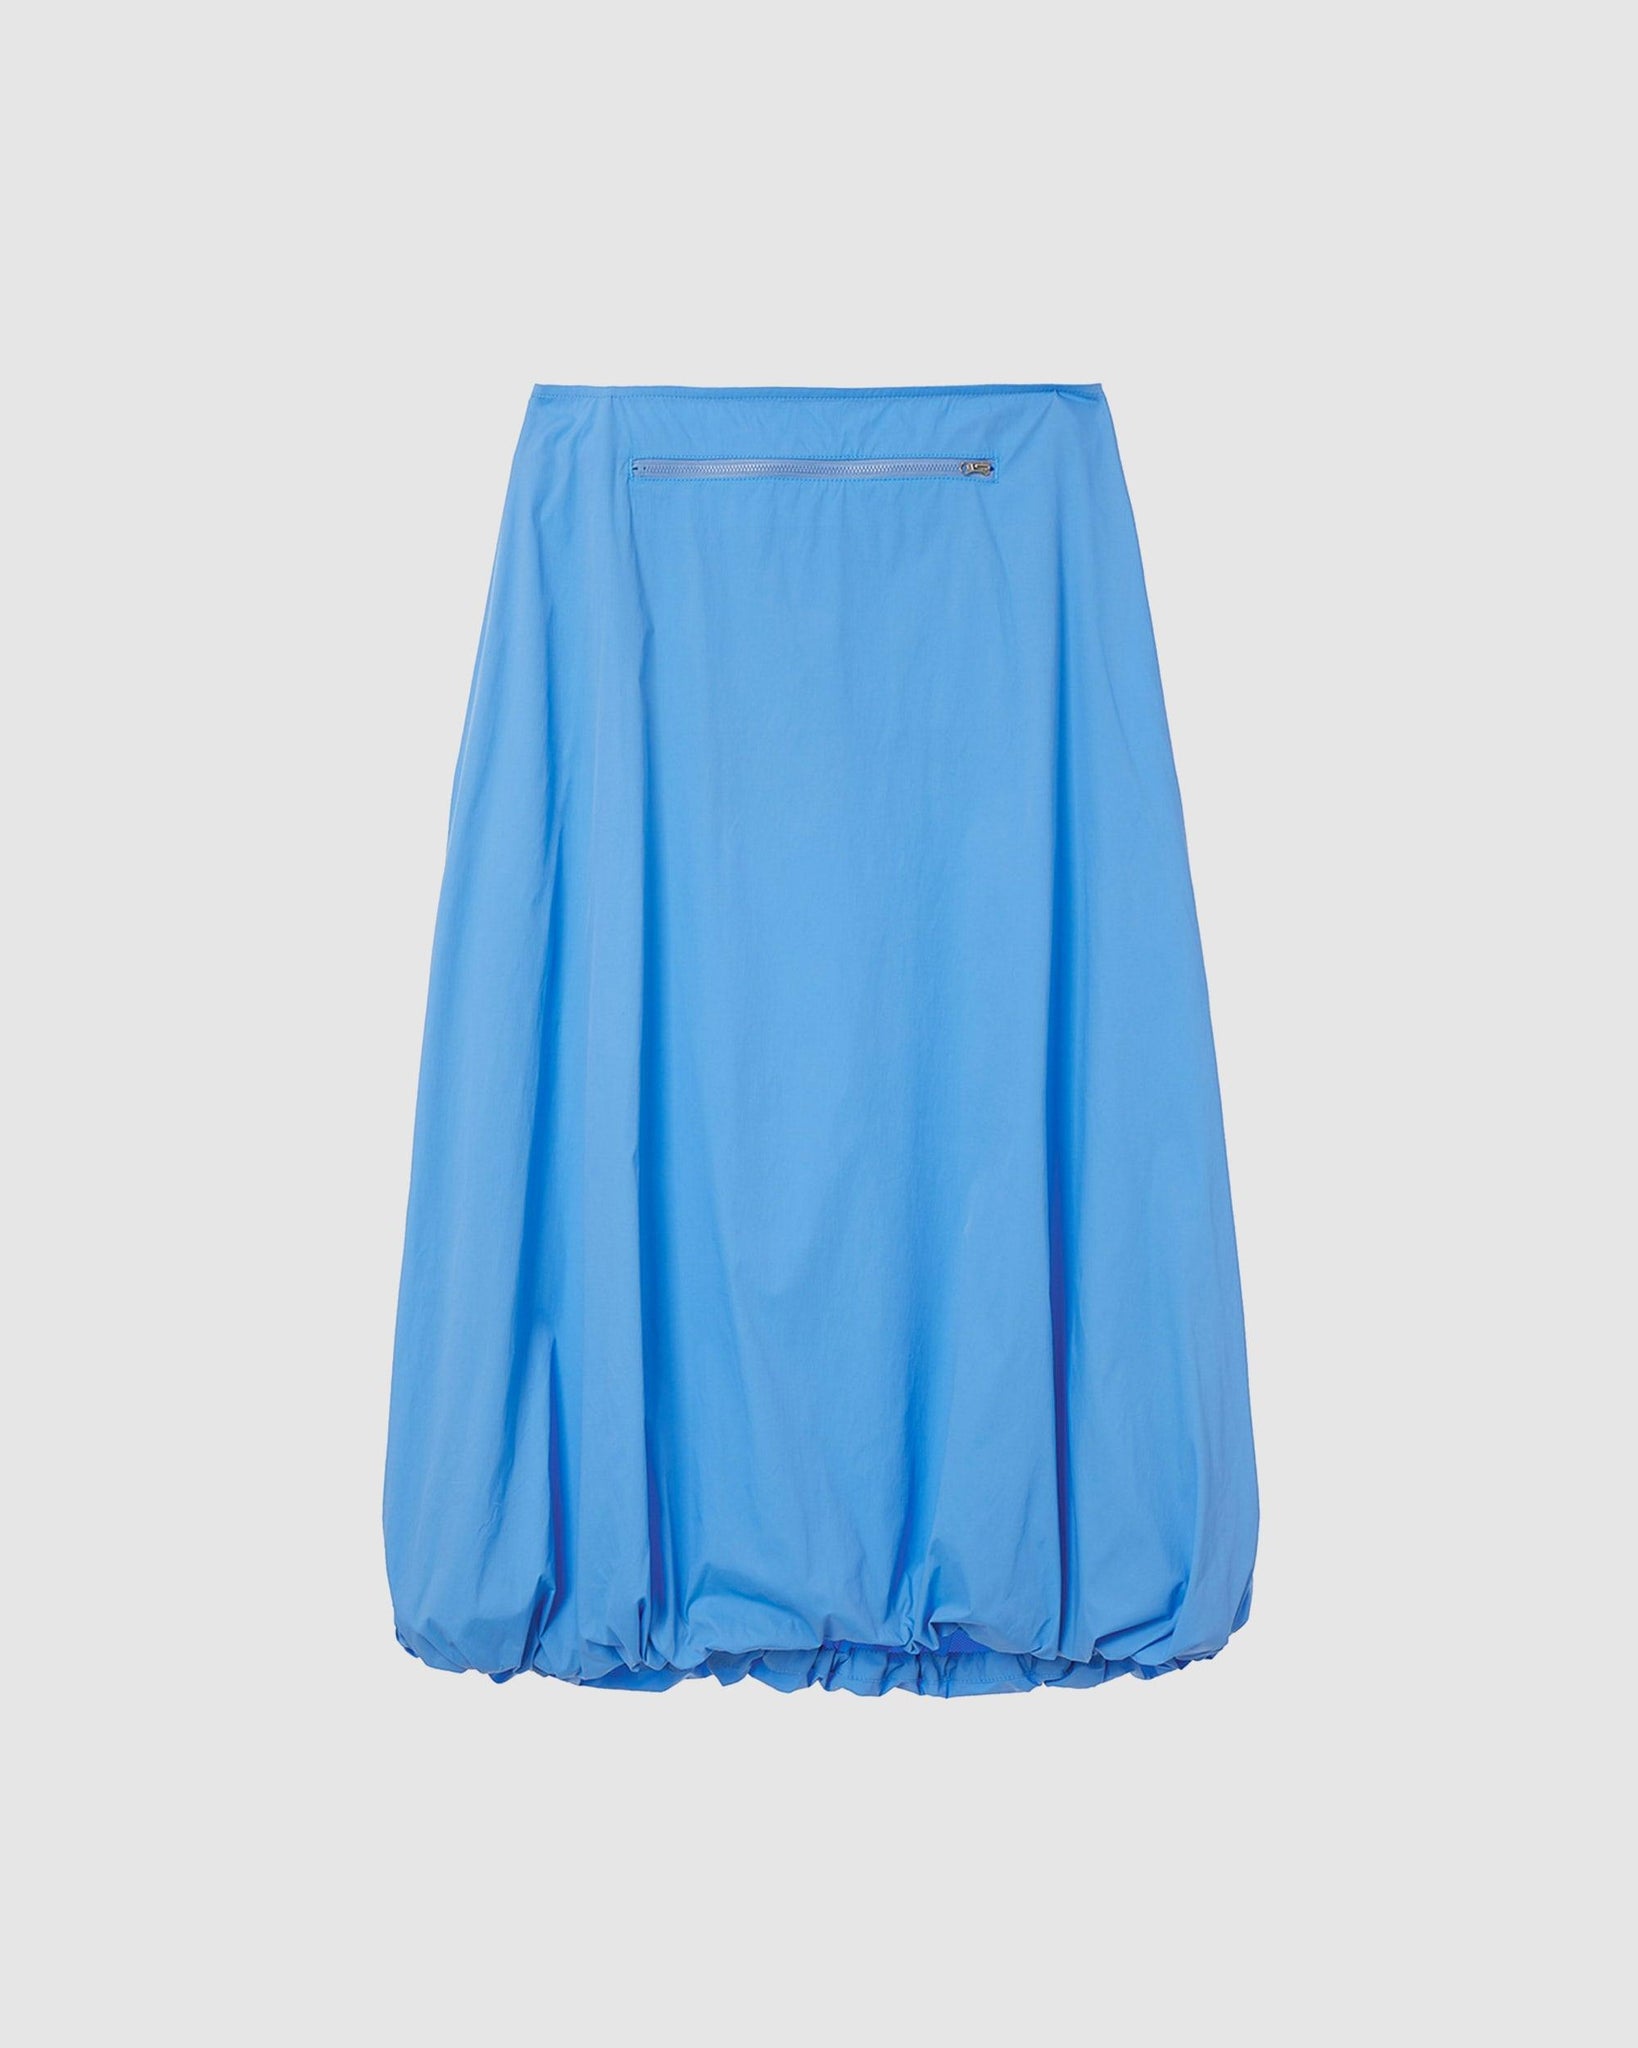 Nylon String Skirt - {{ collection.title }} - Chinatown Country Club 